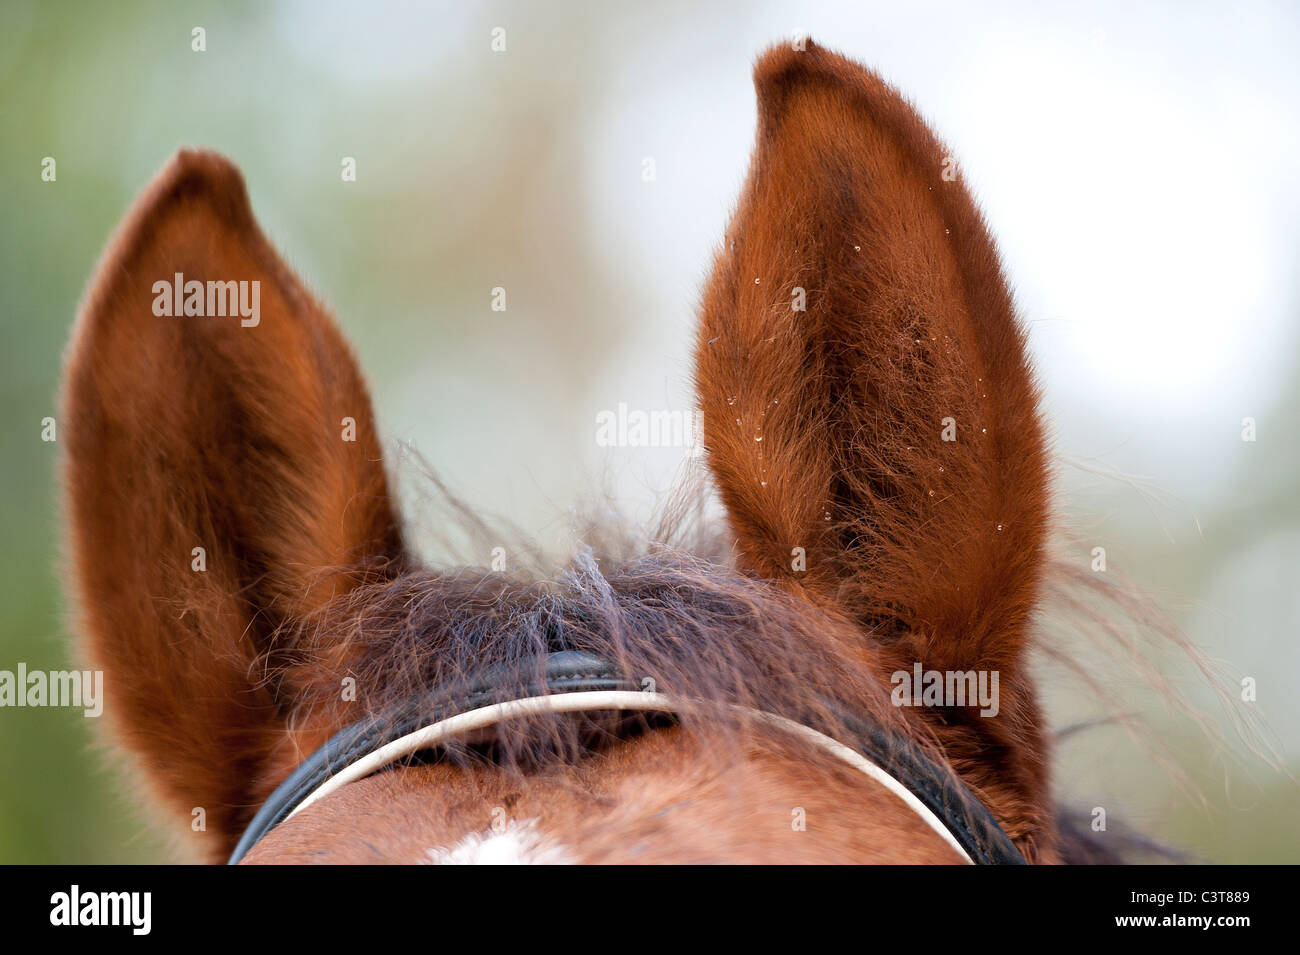 Ears of a brown horse with a few waterdrops Stock Photo